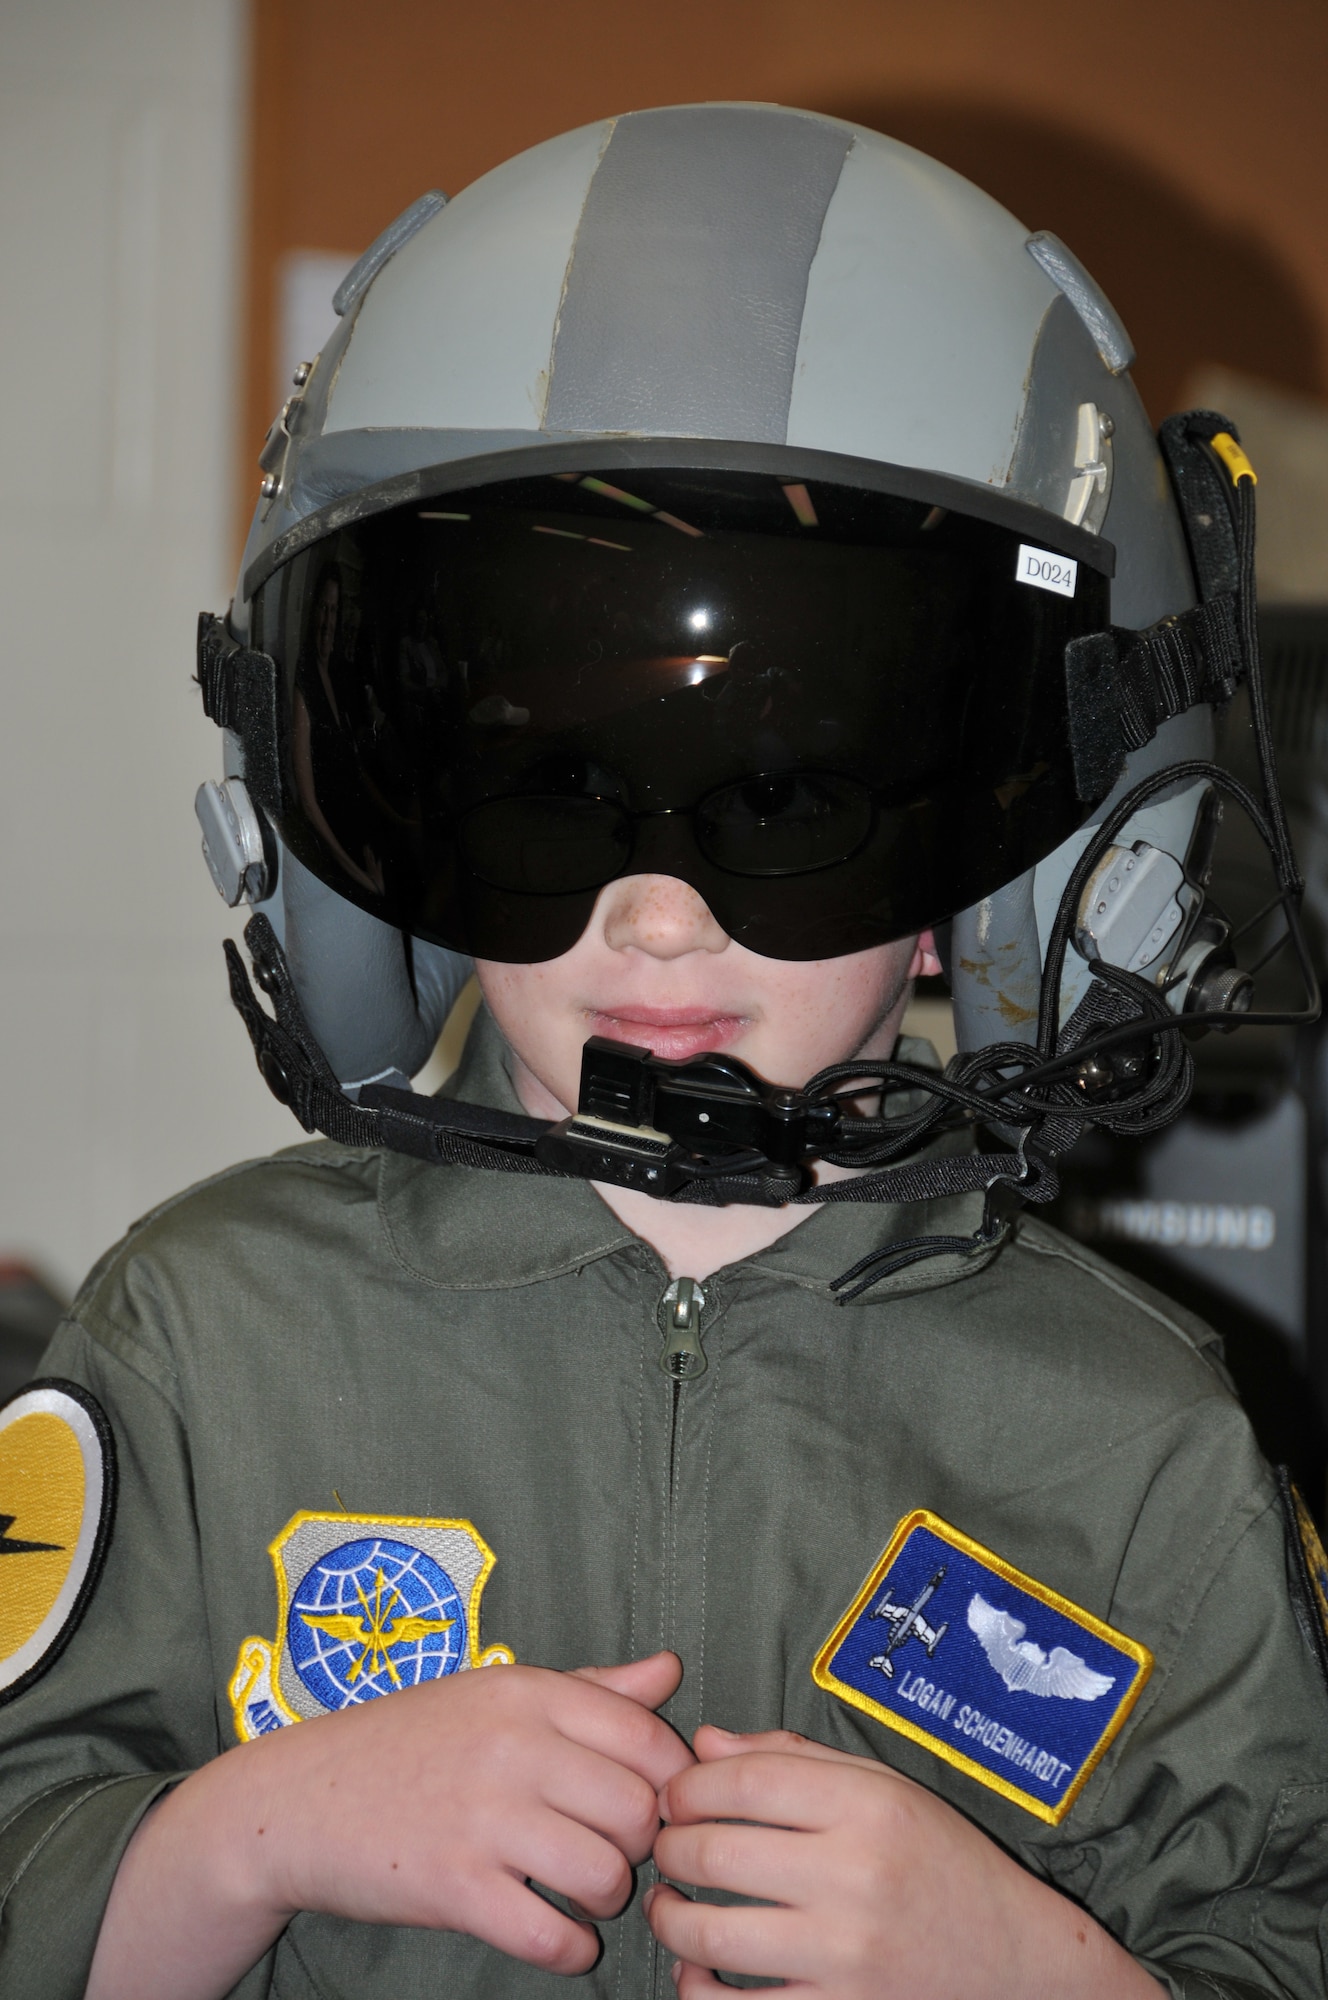 Logan Schoenhardt tries on a pilot's helmet during the Pilot for A Day Program at Bradley Air National Guard Base, East Granby, Conn., May 3, 2013. (Air National Guard photo by Senior Airman Jennifer Pierce/Released)